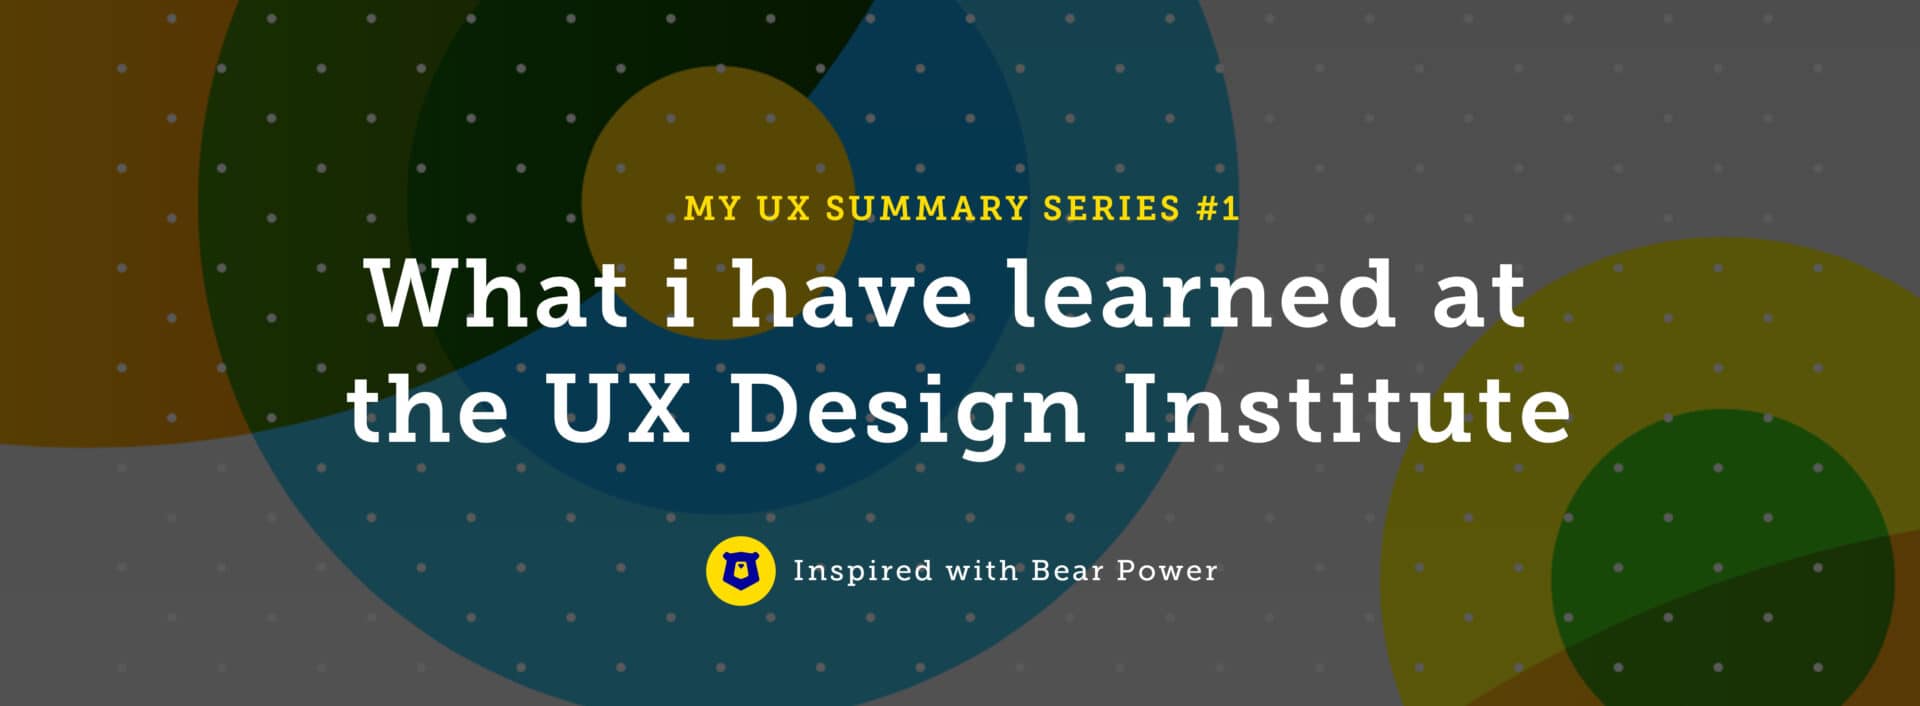 What I have learned at the UX Design Institute - My UX summary series #1